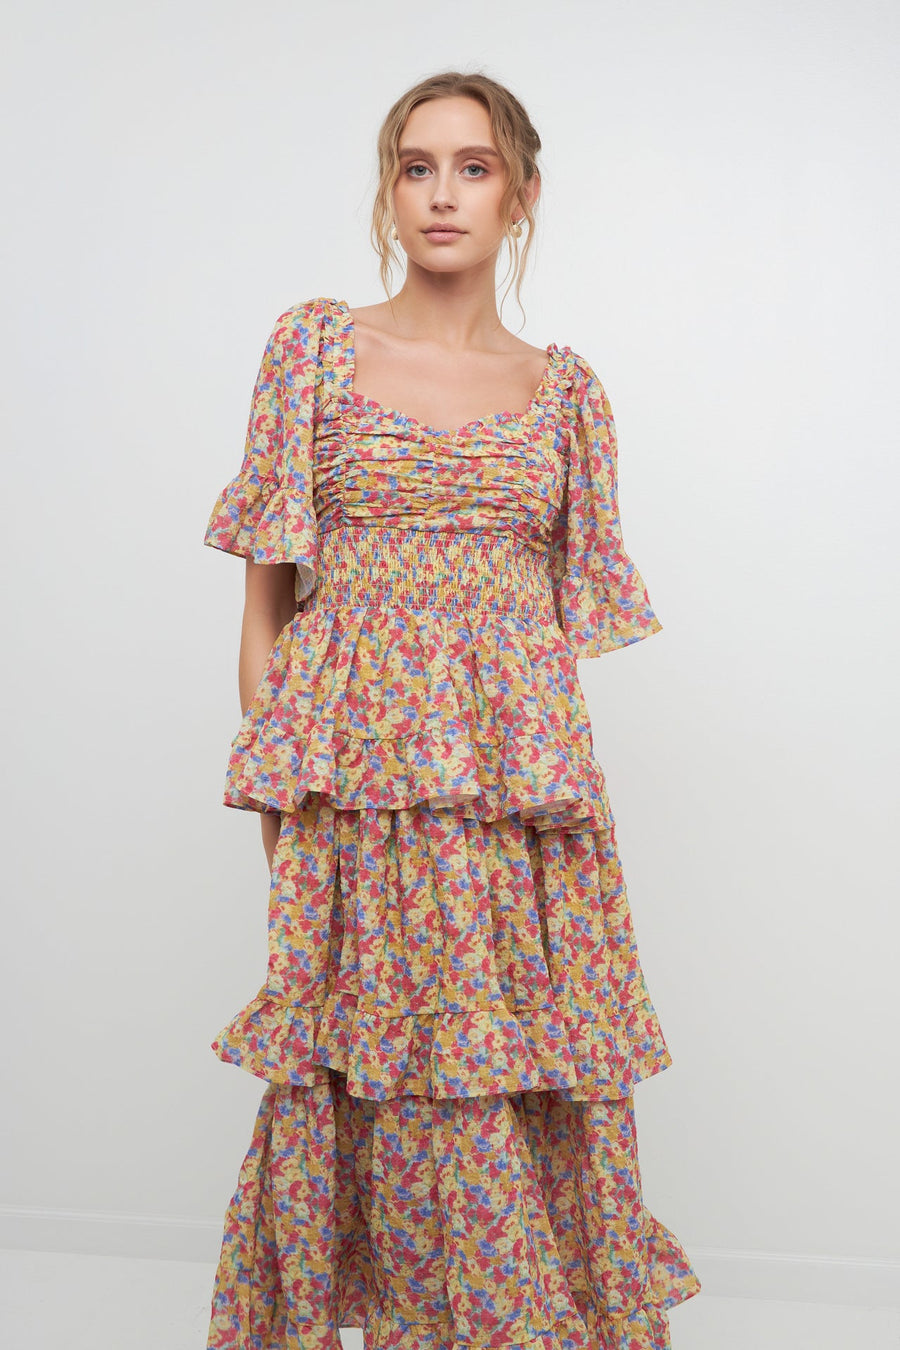 FREE THE ROSES-Floral Smocked Ruffle Tiered Maxi Dress-DRESSES available at Objectrare